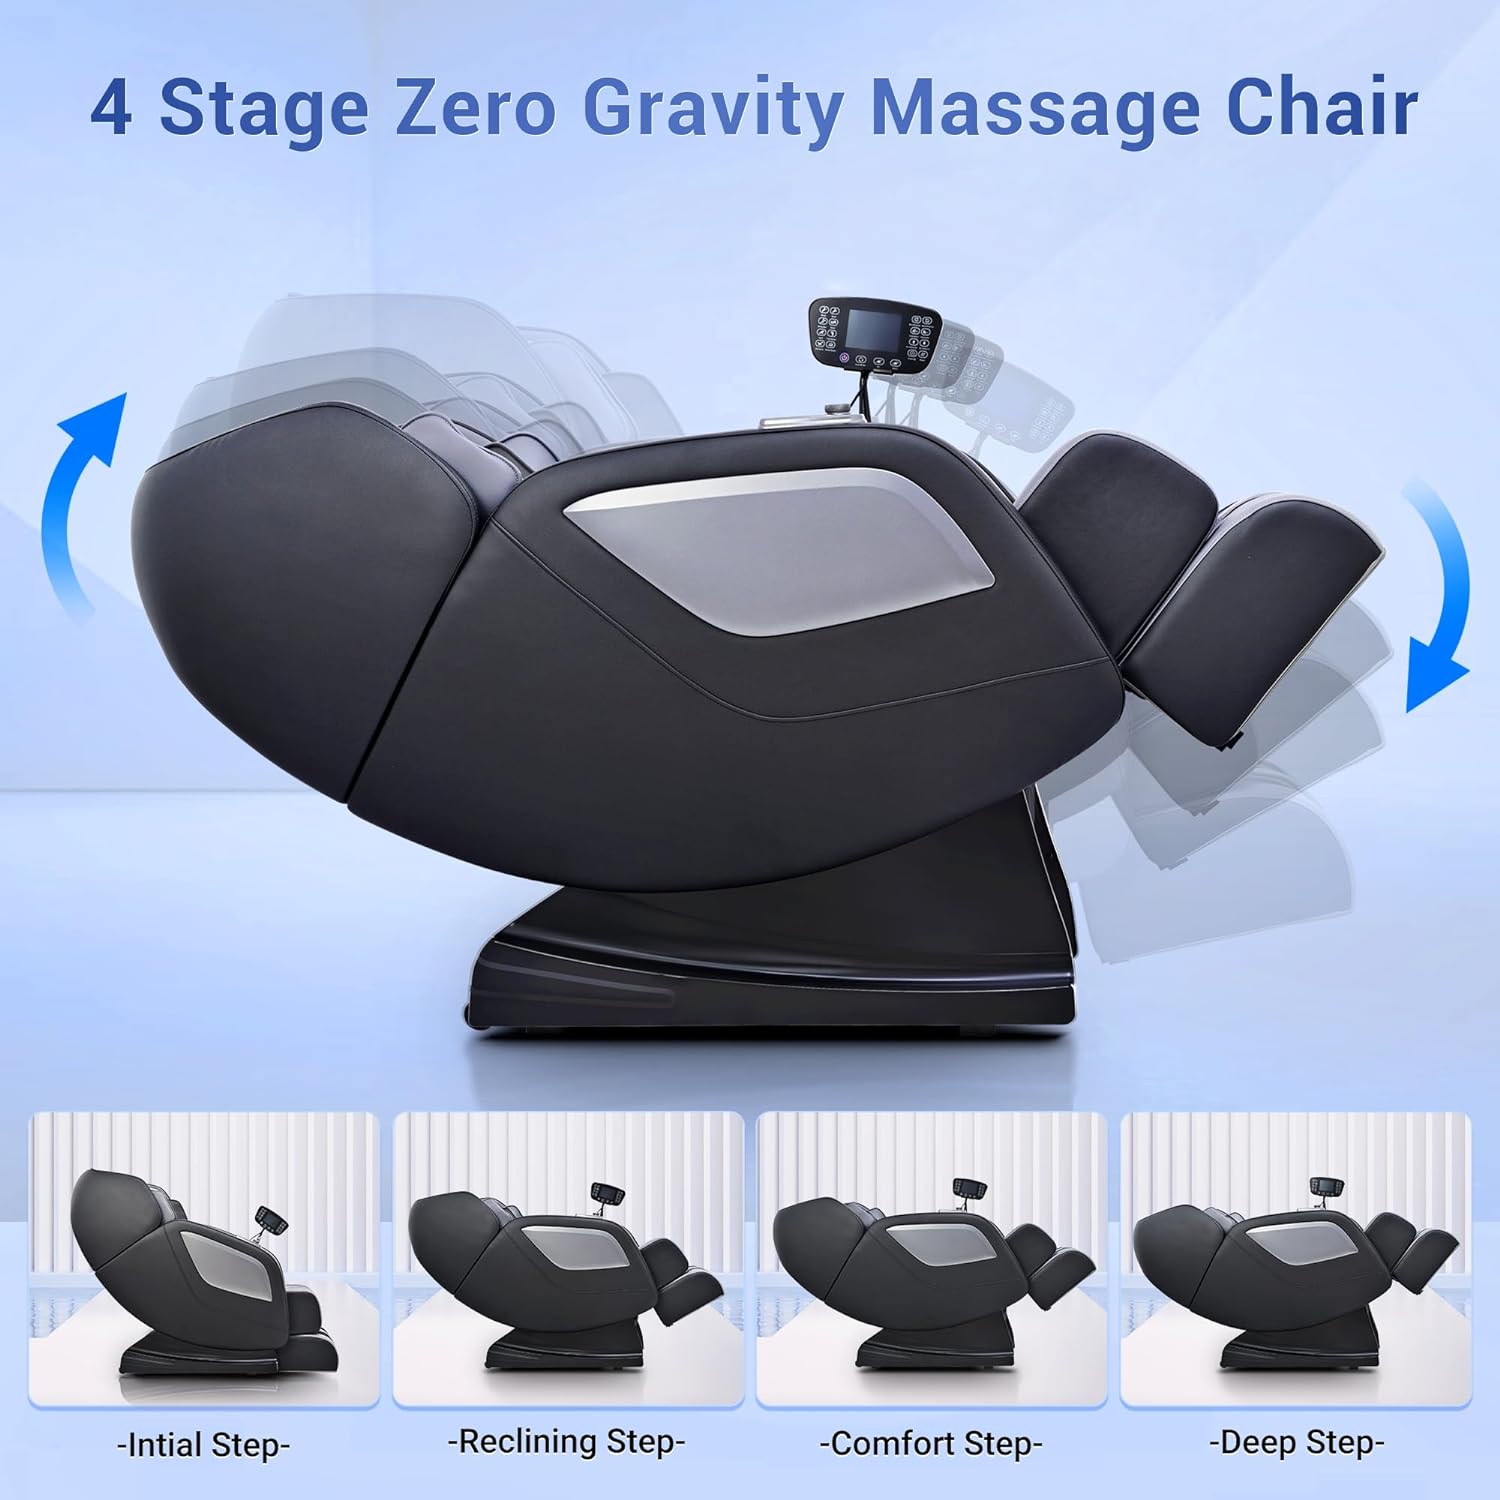 Mazzup Full Body Zero Gravity Shiatsu Massage Chair with Fully Assembled,  LCD Screen, Shortcut Keys, USB Charging Port, Heat, Ideal Gift for Loved 